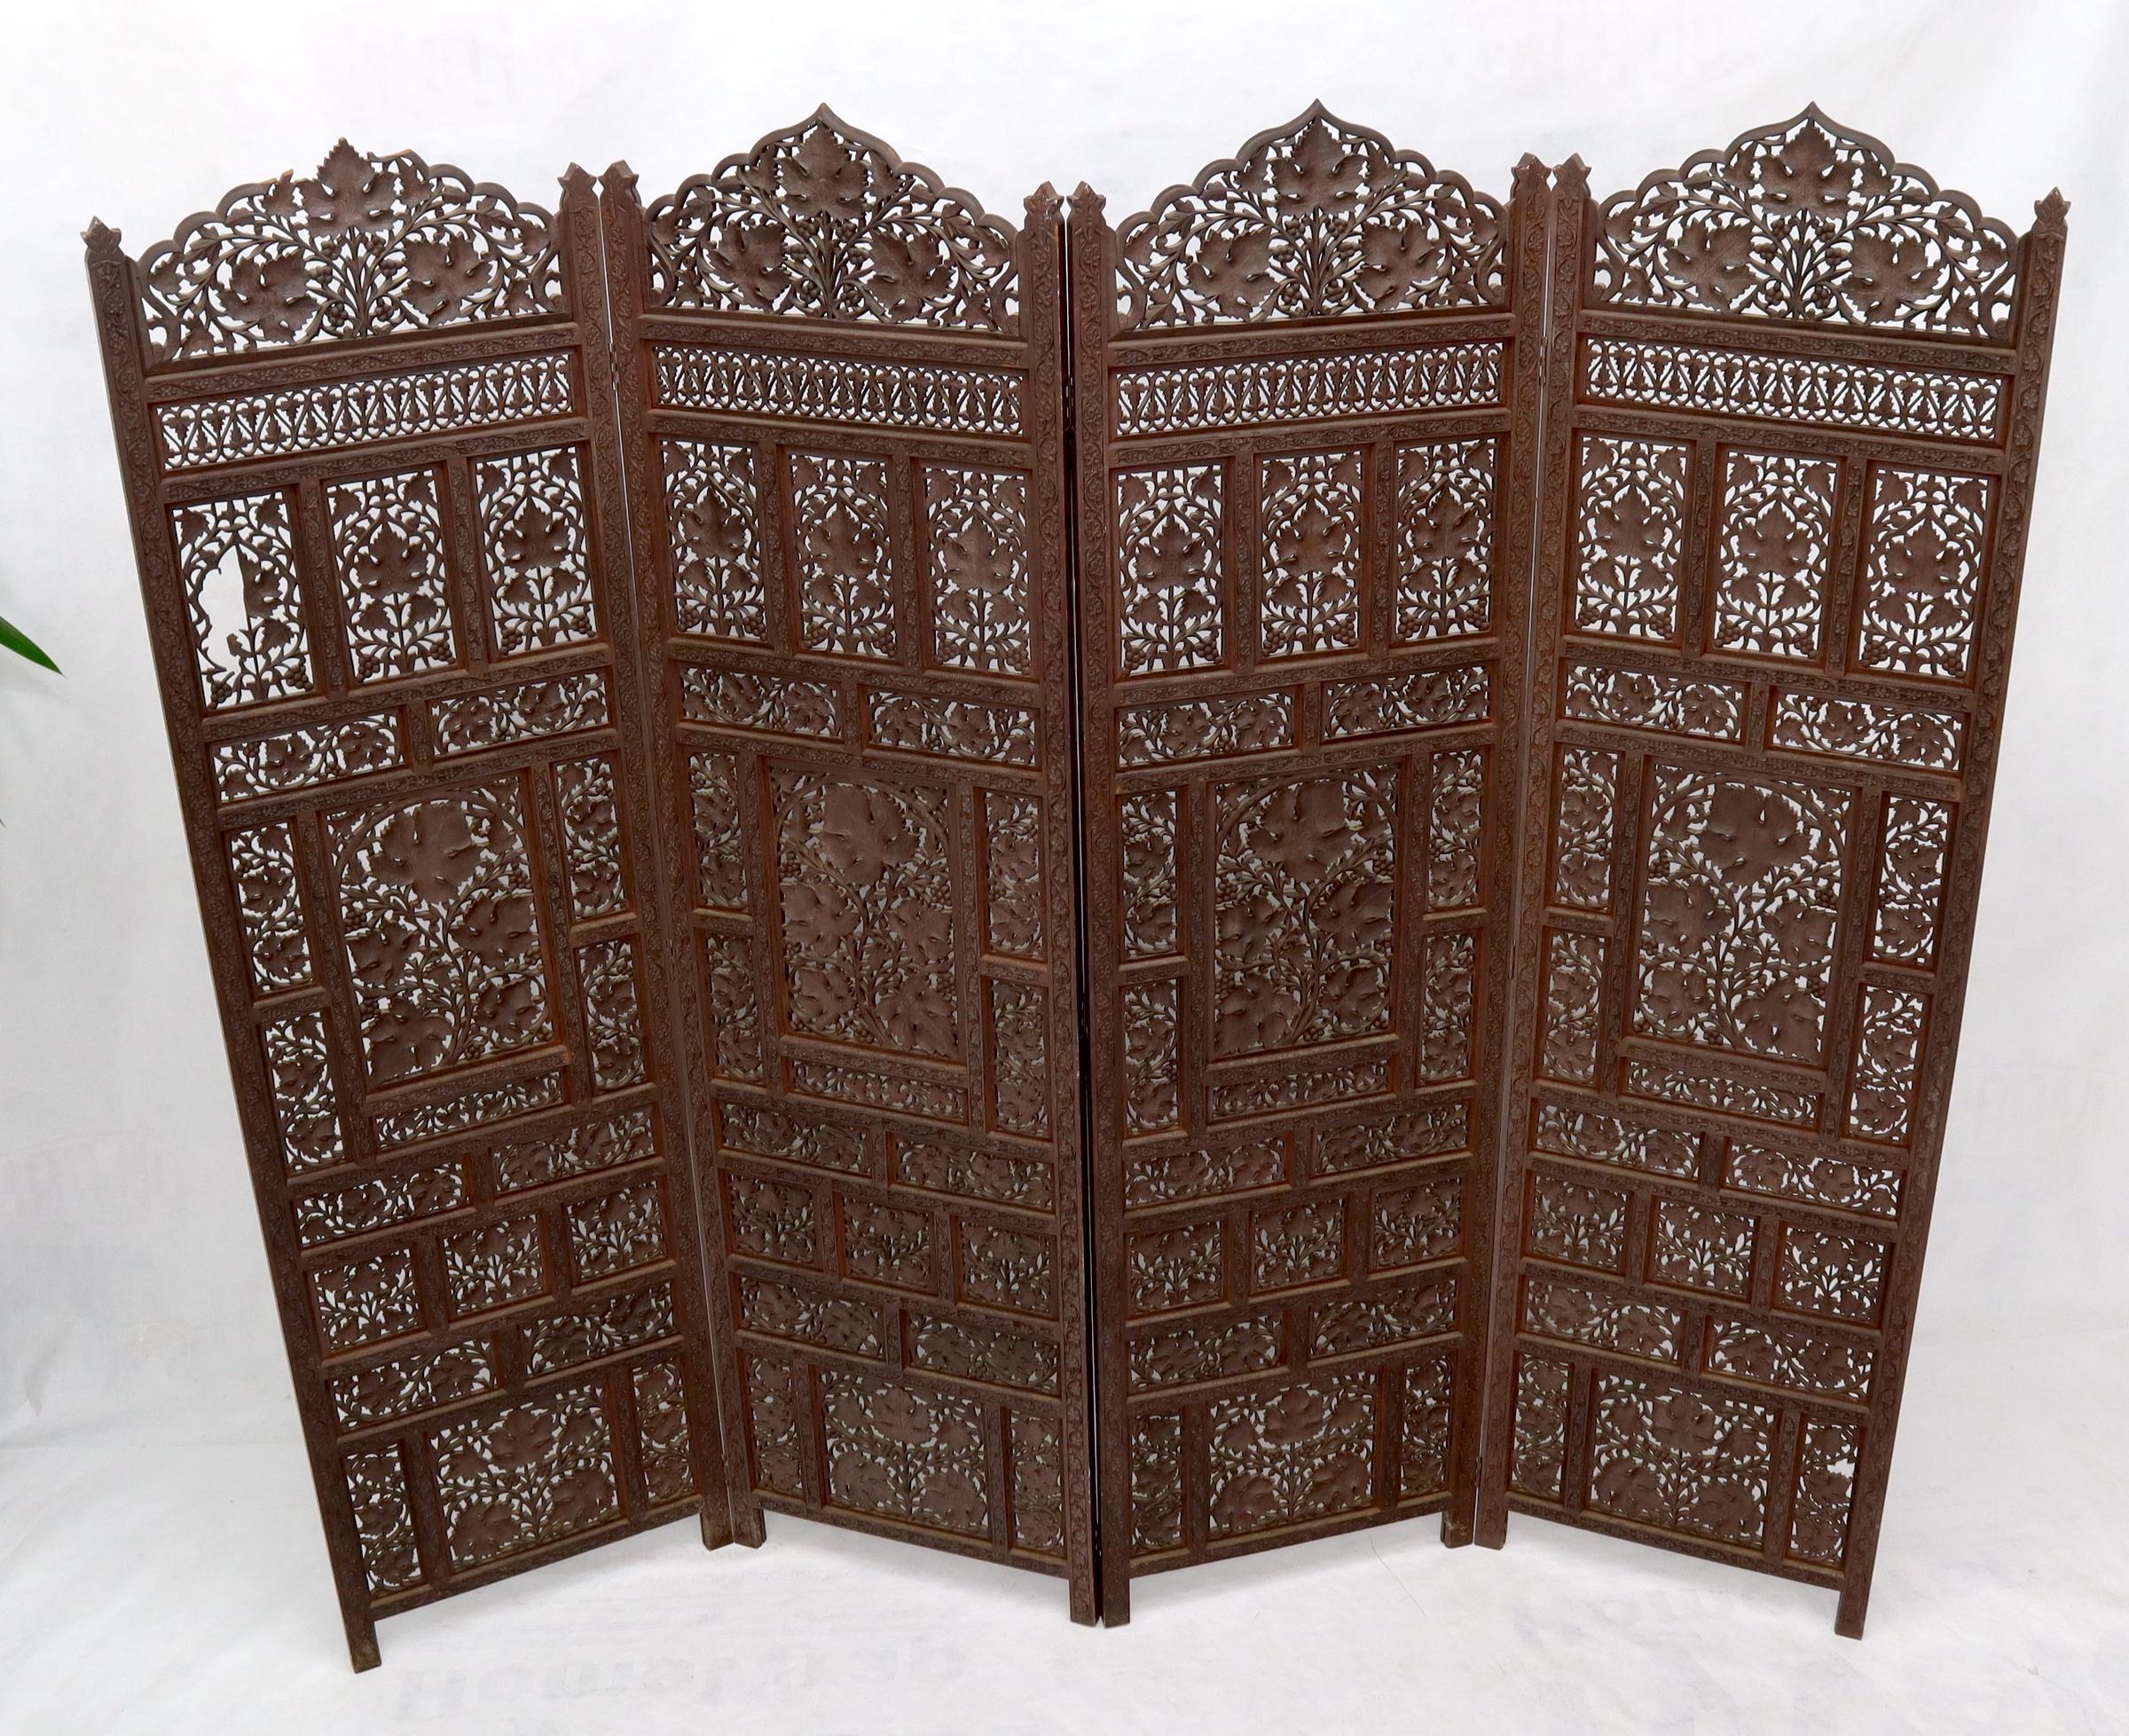 Very nicely and finely intricate carved teak 4-panel screen room divider.